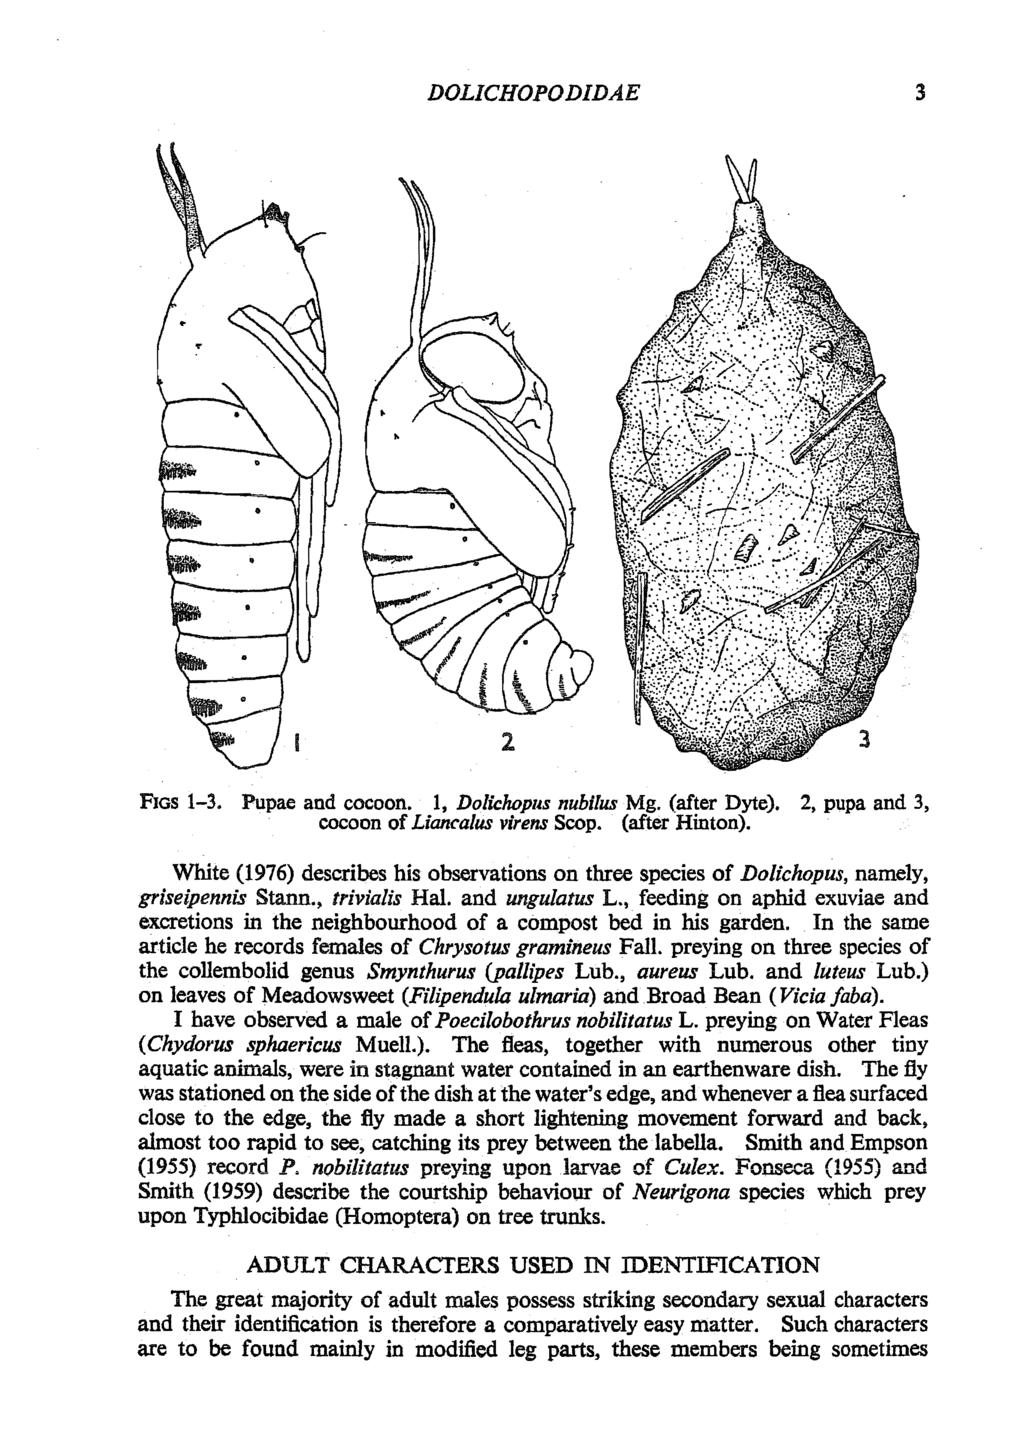 DOLICHOPODIDAE 3 2 FIGS 1-3. Pupae and cocoon. 1, Dolichopus nubllus Mg. (after Dyte). 2, pupa and 3, cocoon of Liancalus virens Scop. (after Hinton).